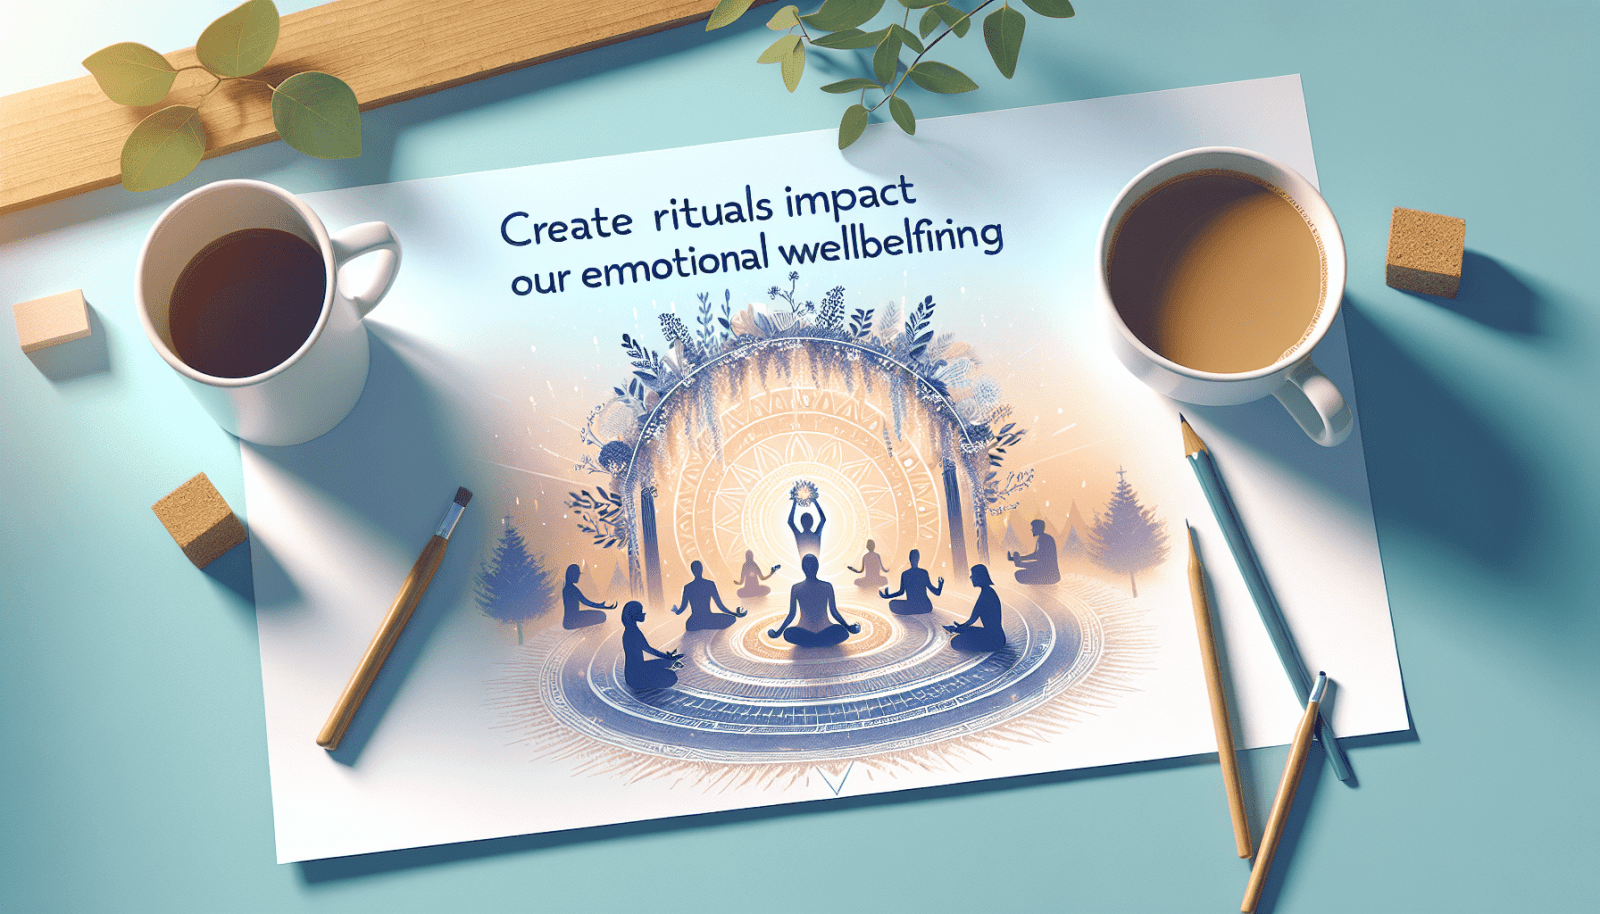 An artistic workplace setup with a poster reading "Create rituals impact our emotional wellbeing" featuring an illustration of people meditating around a mandala, flanked by a coffee cup, pencils, sugar cubes, and a plant on a wooden plank.